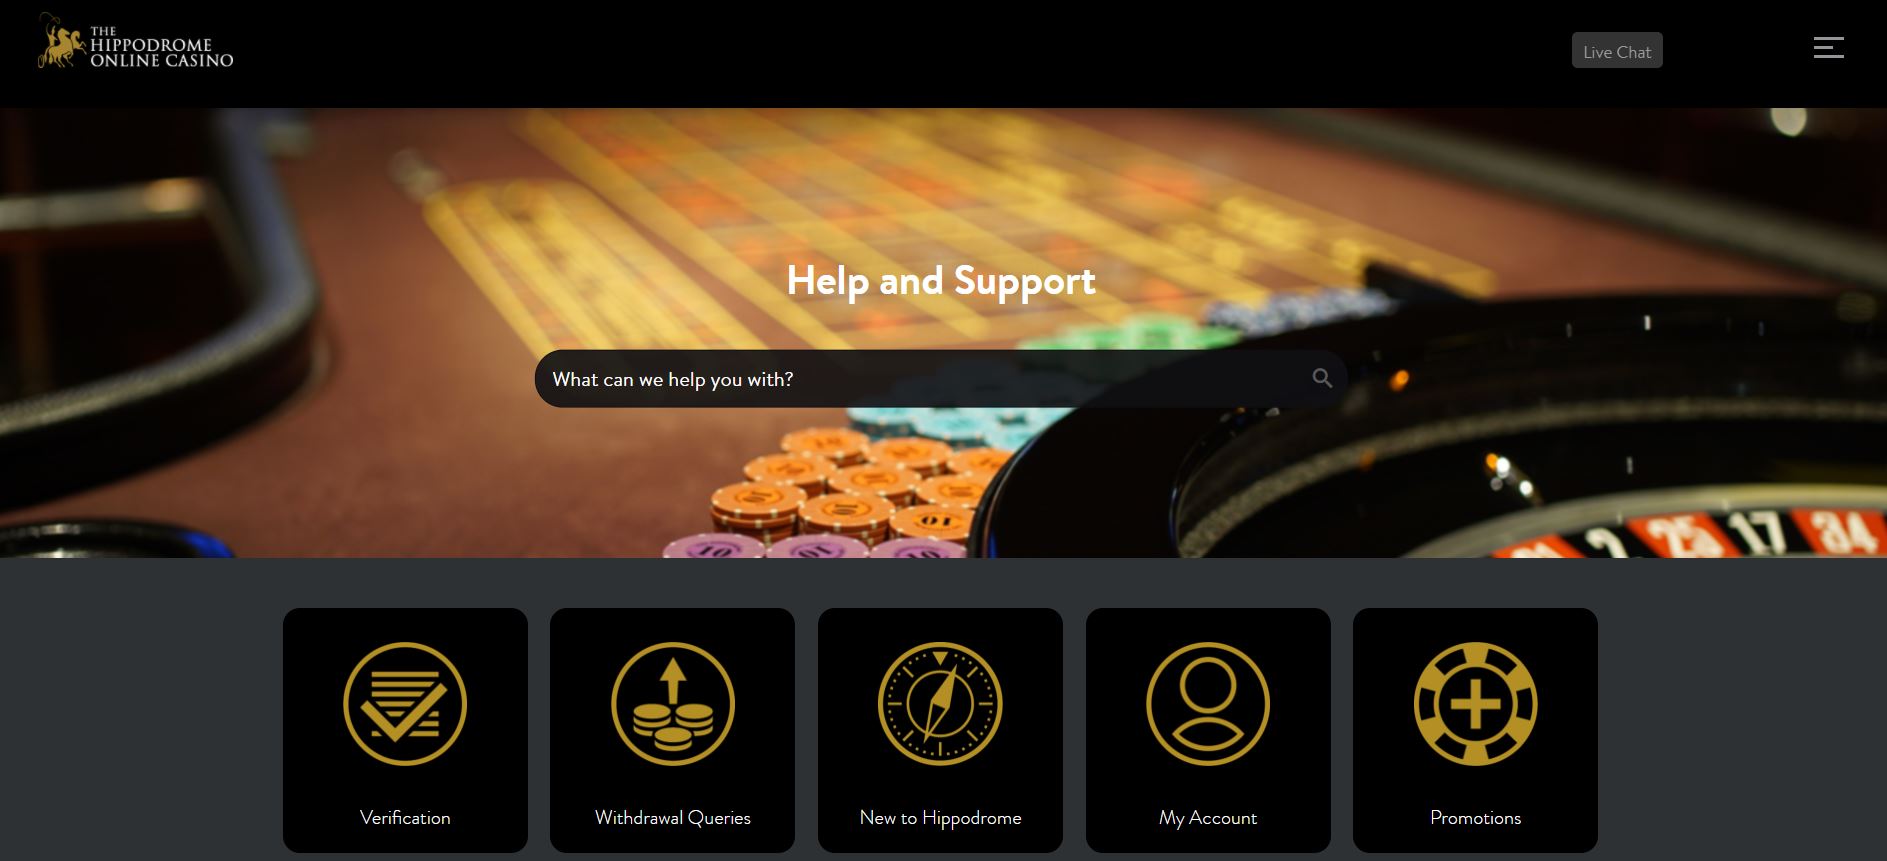 the hippodrome online casino help and support